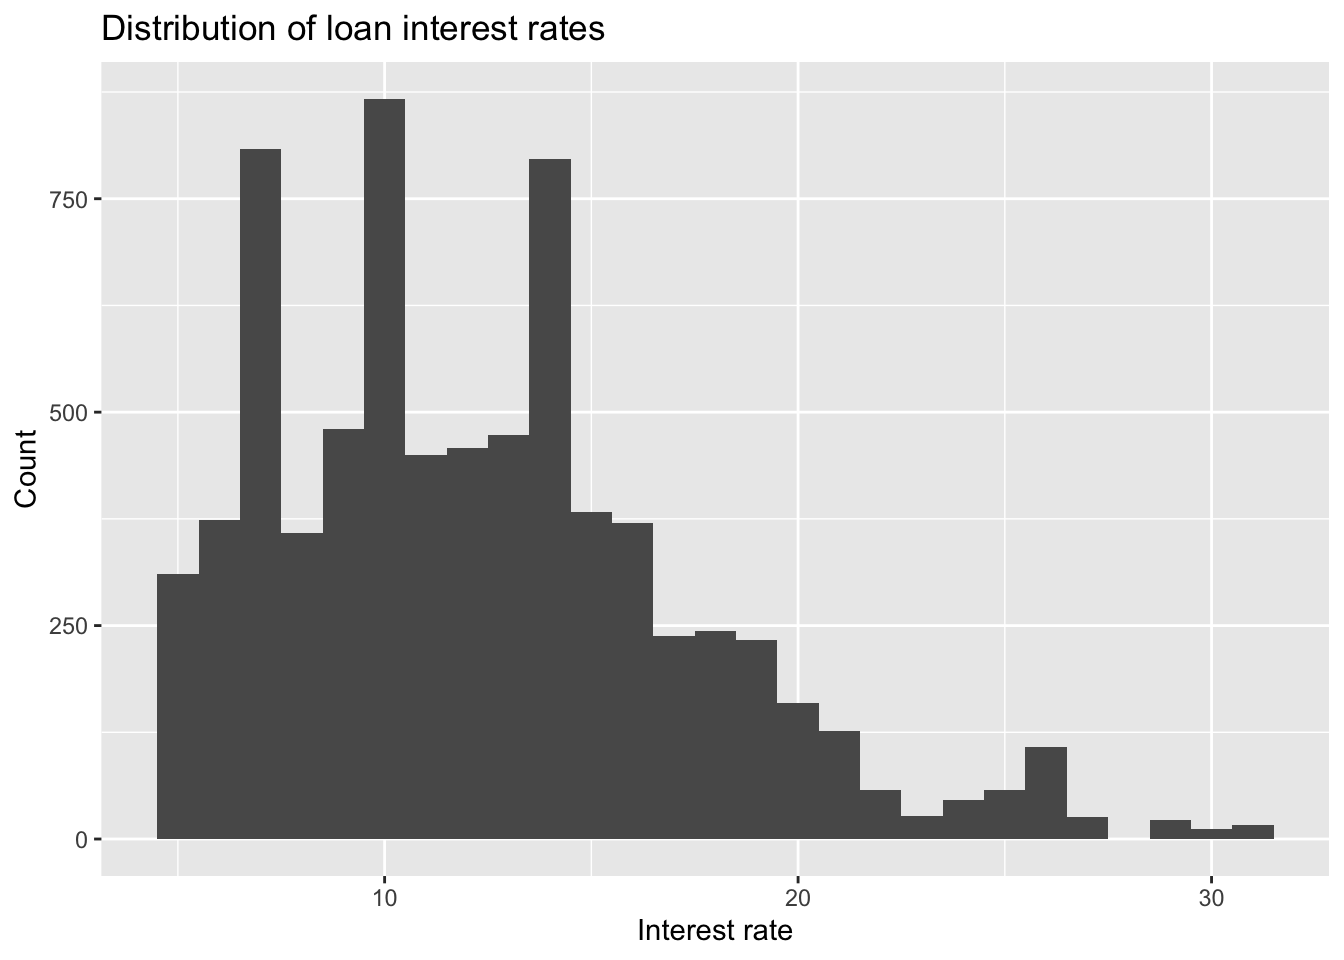 A histogram of interest rate showing a right skewed distribution with peaks at 5%, 10%, and 15%. There are very few loans with interest rates above 20%.